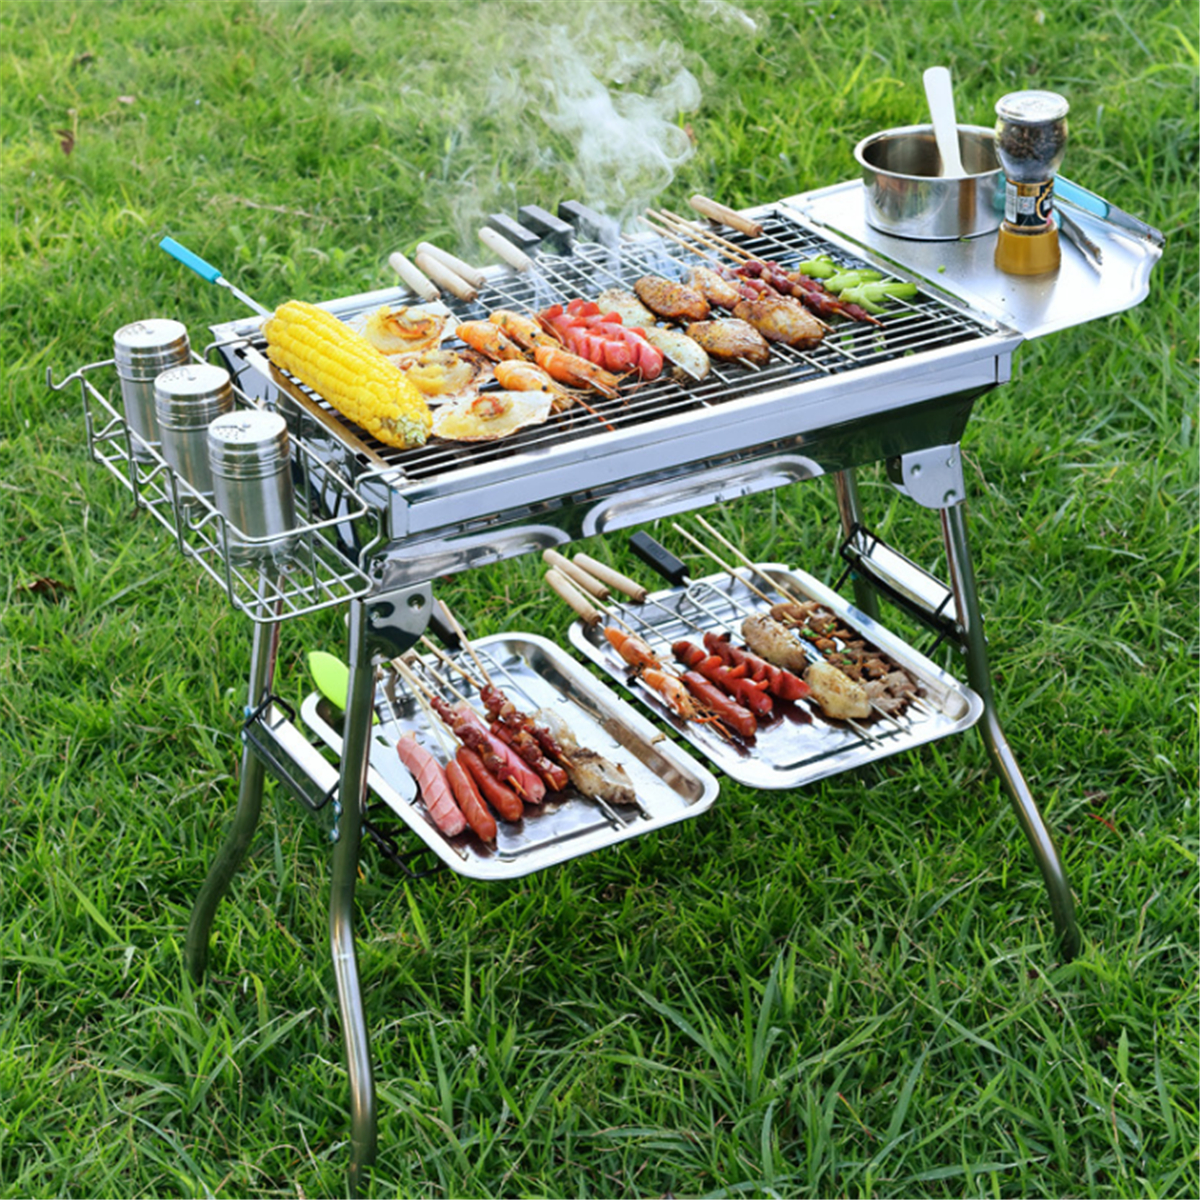 Stainless-Steel-BBQ-Charcoal-Barbecue-Grill-Outdoor-Garden-Picnic-Camping-Cook-1697295